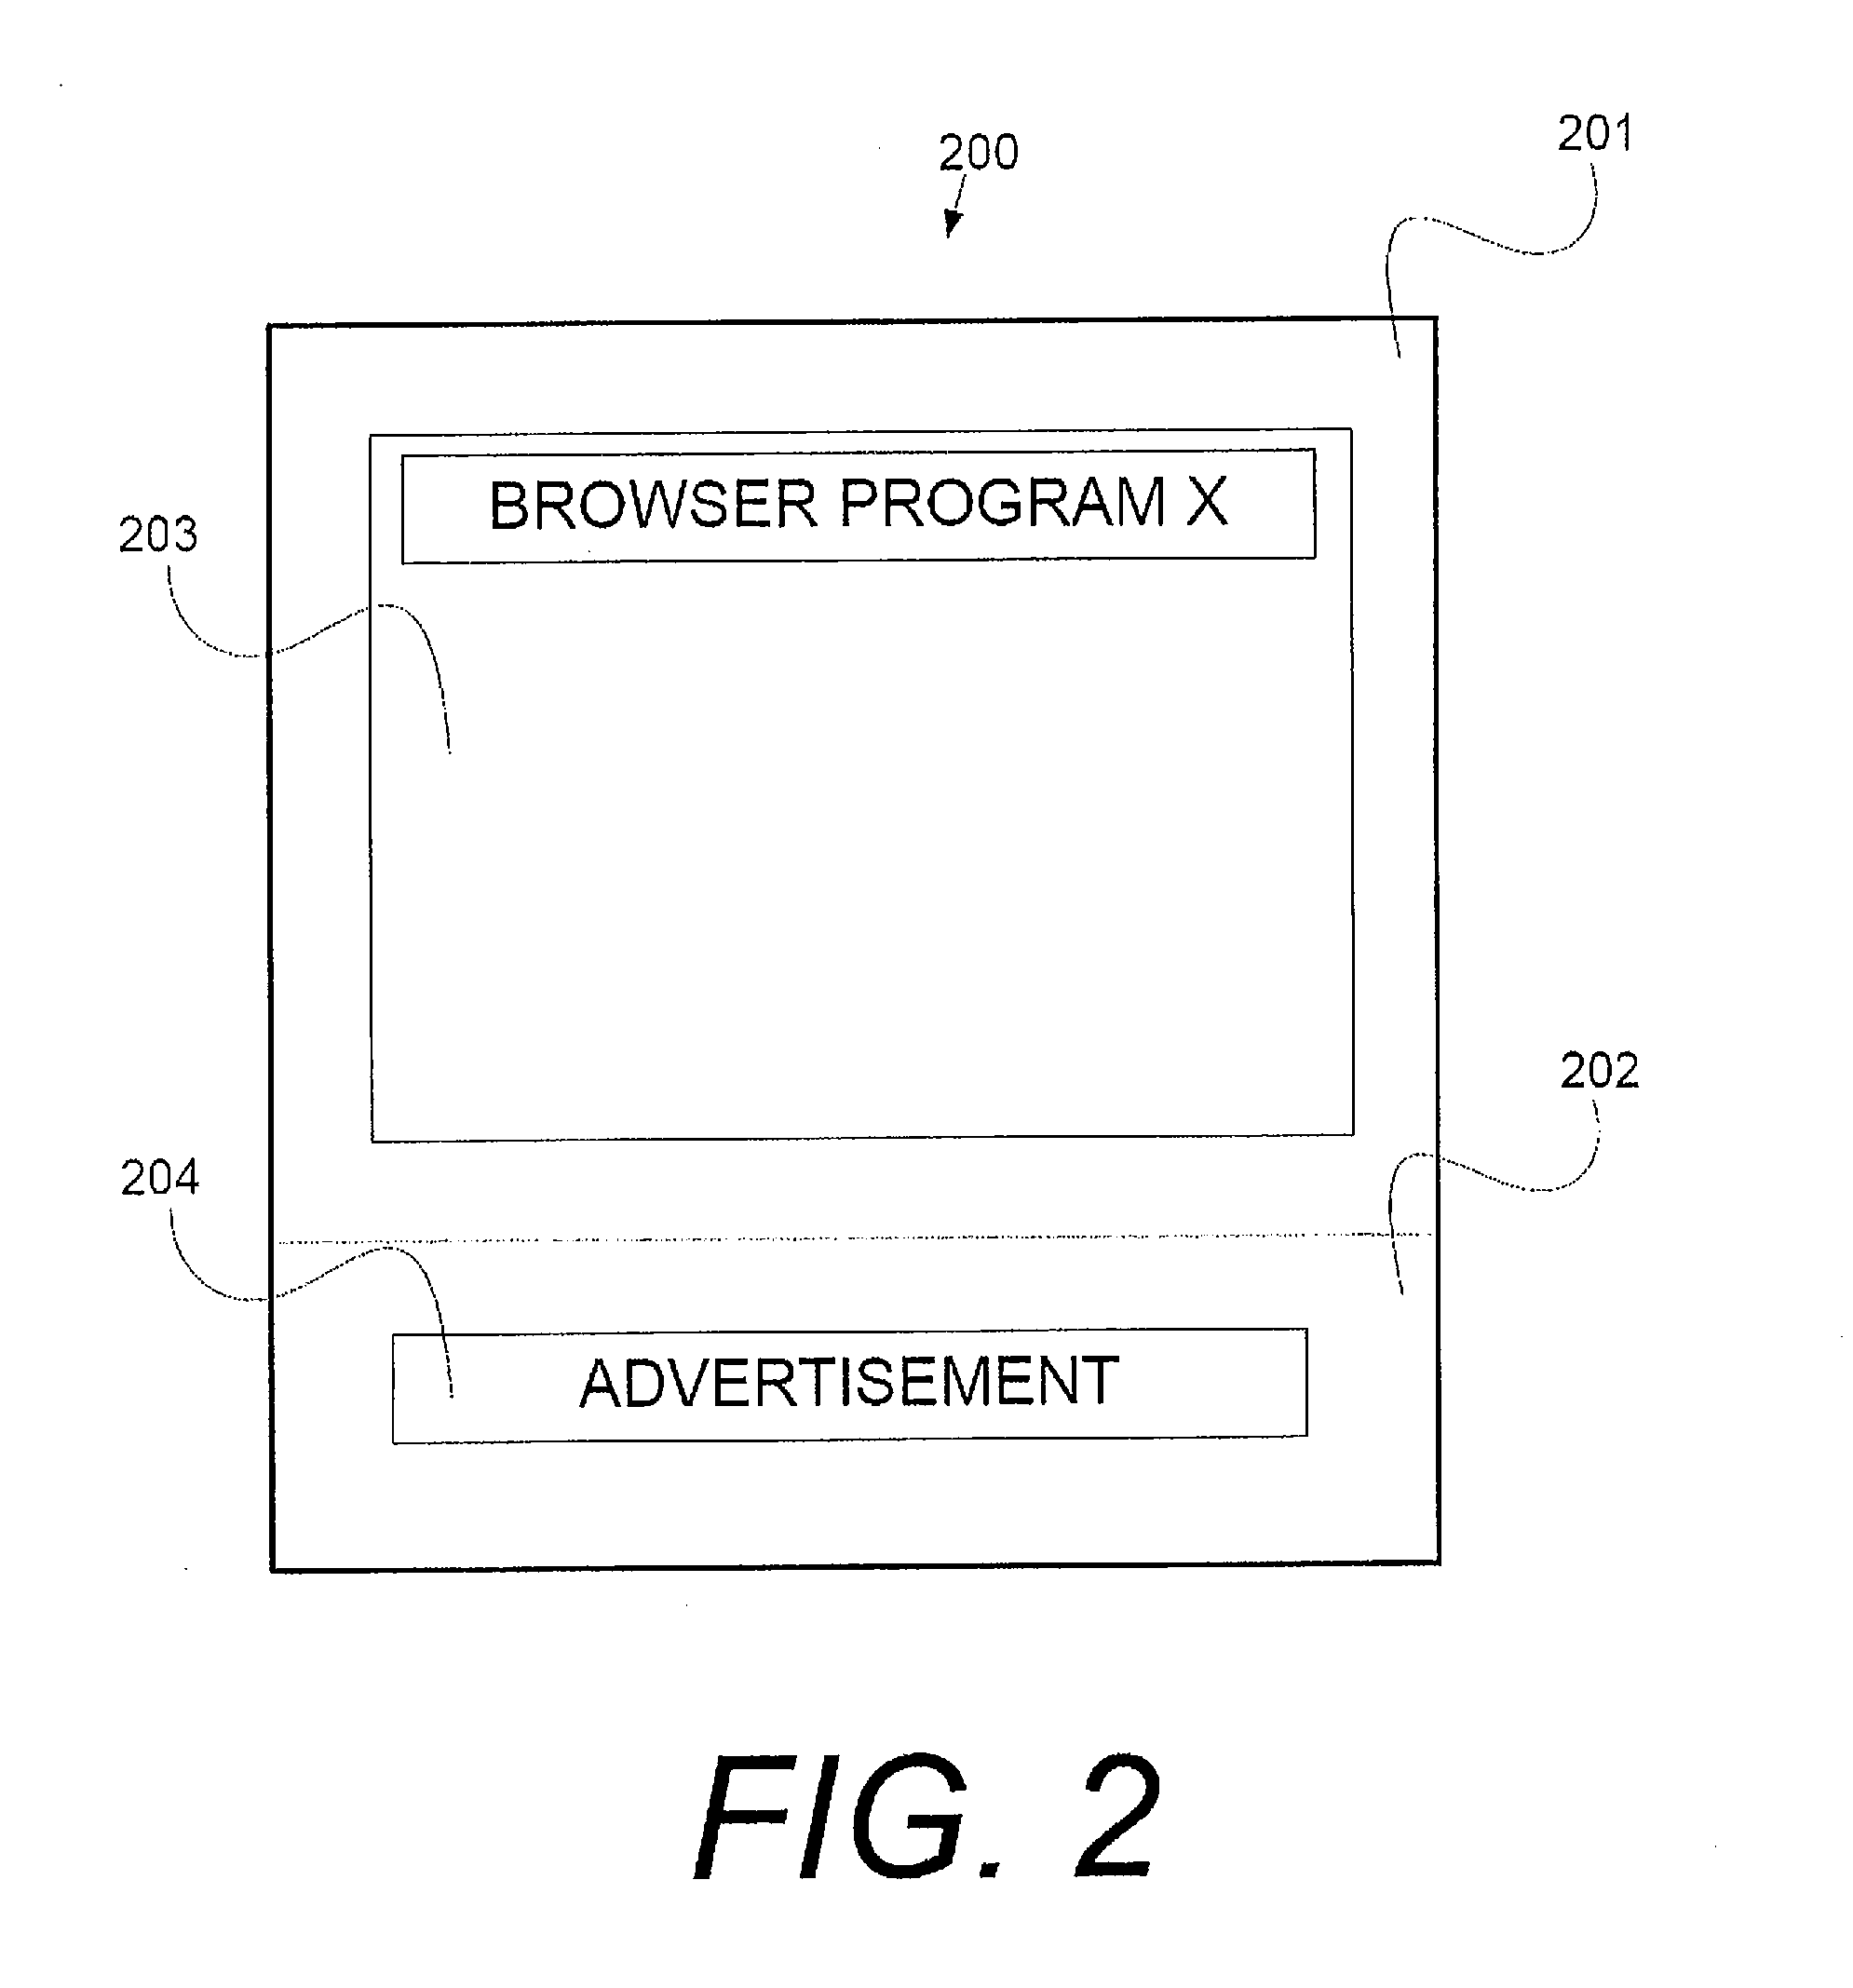 System and Method for Providing Controlled User Access to a Portable Electronic Device